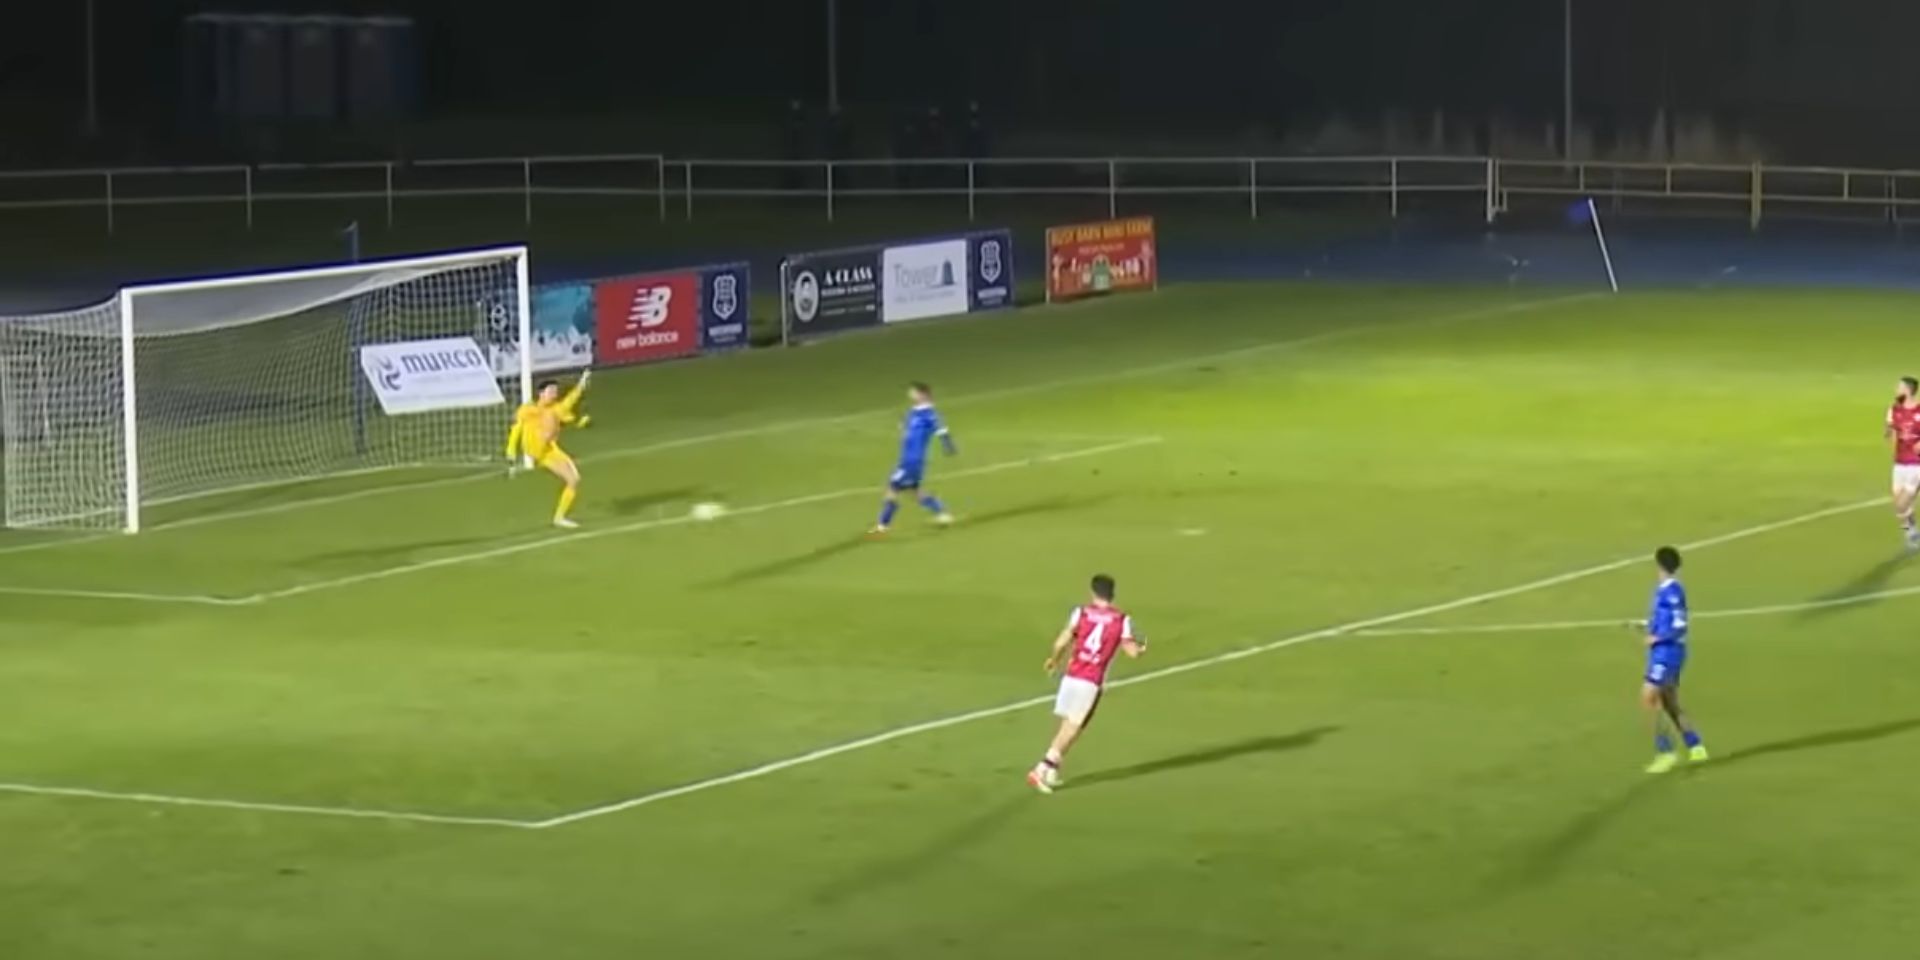 (Video) Liverpool loanee produces goalkeeping howler; blushes were spared though